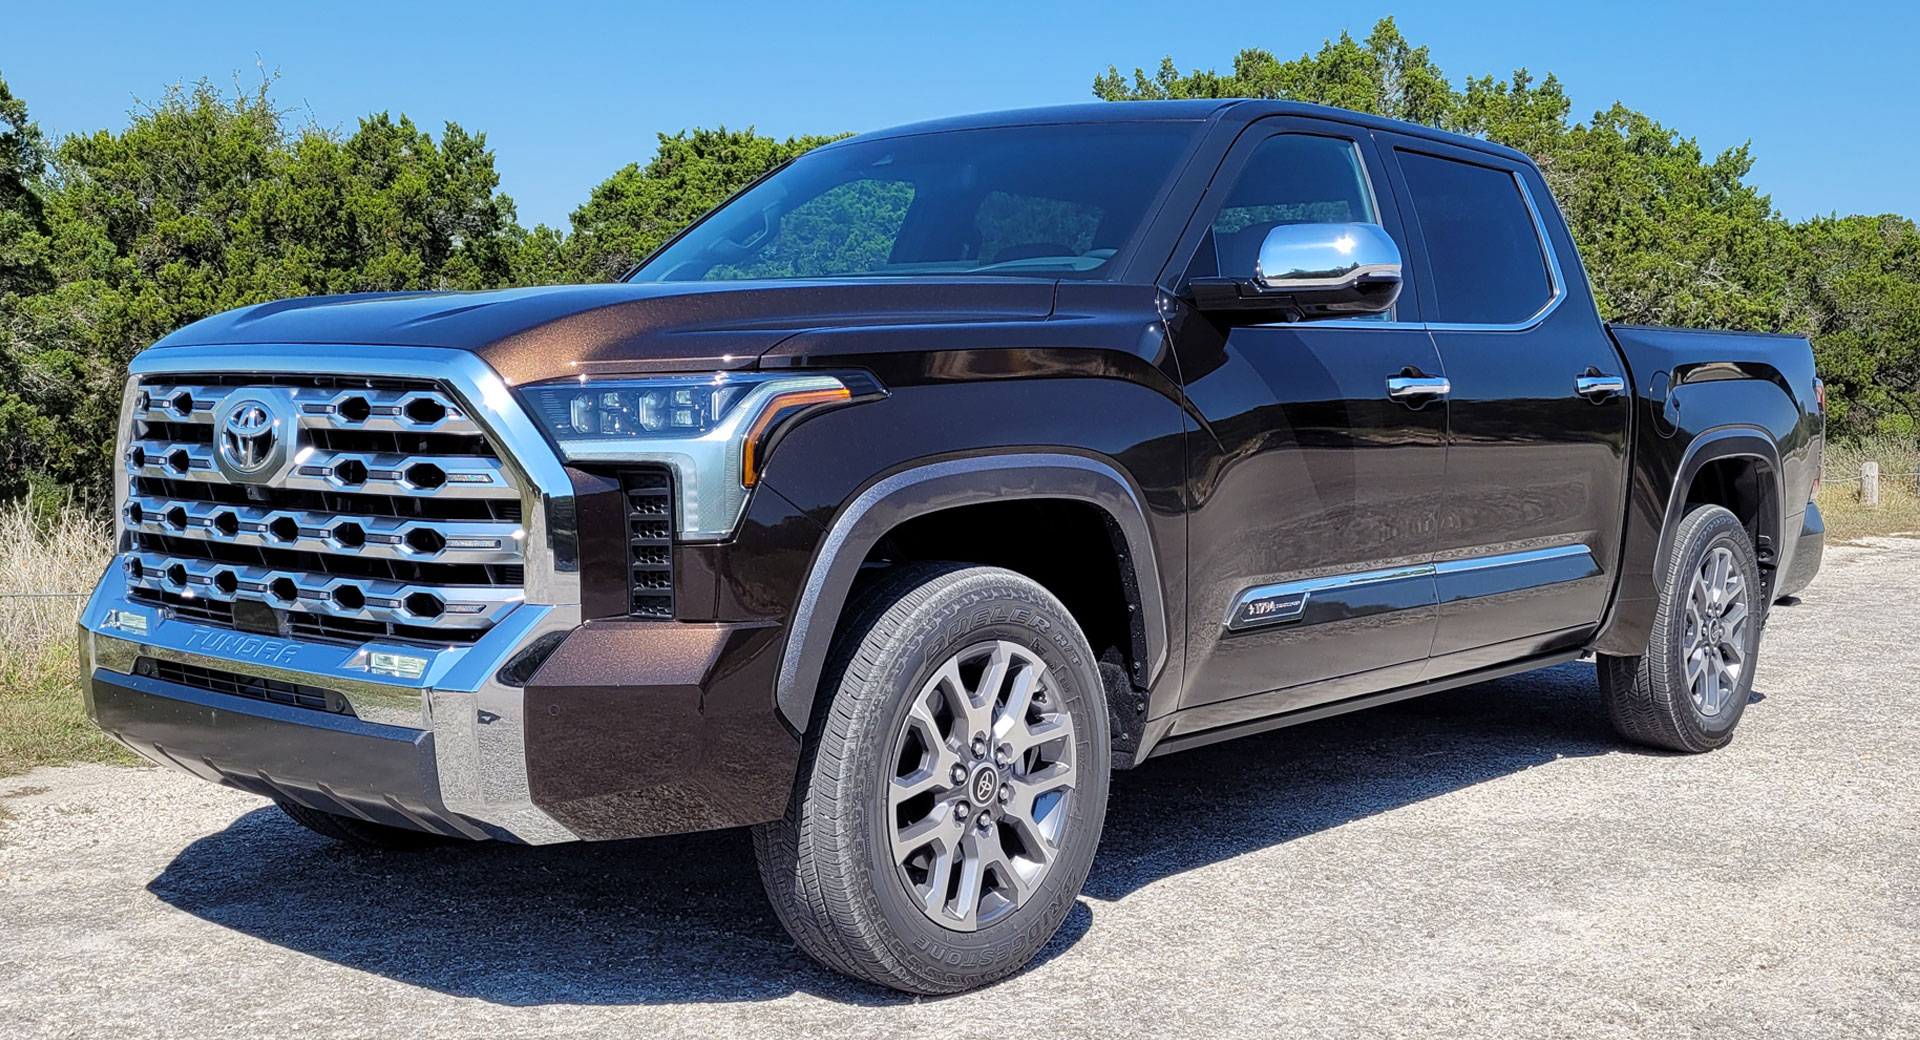 Driven: The 2022 Toyota Tundra Is A Tougher, More Capable Pickup With Available Hybrid Power Auto Recent